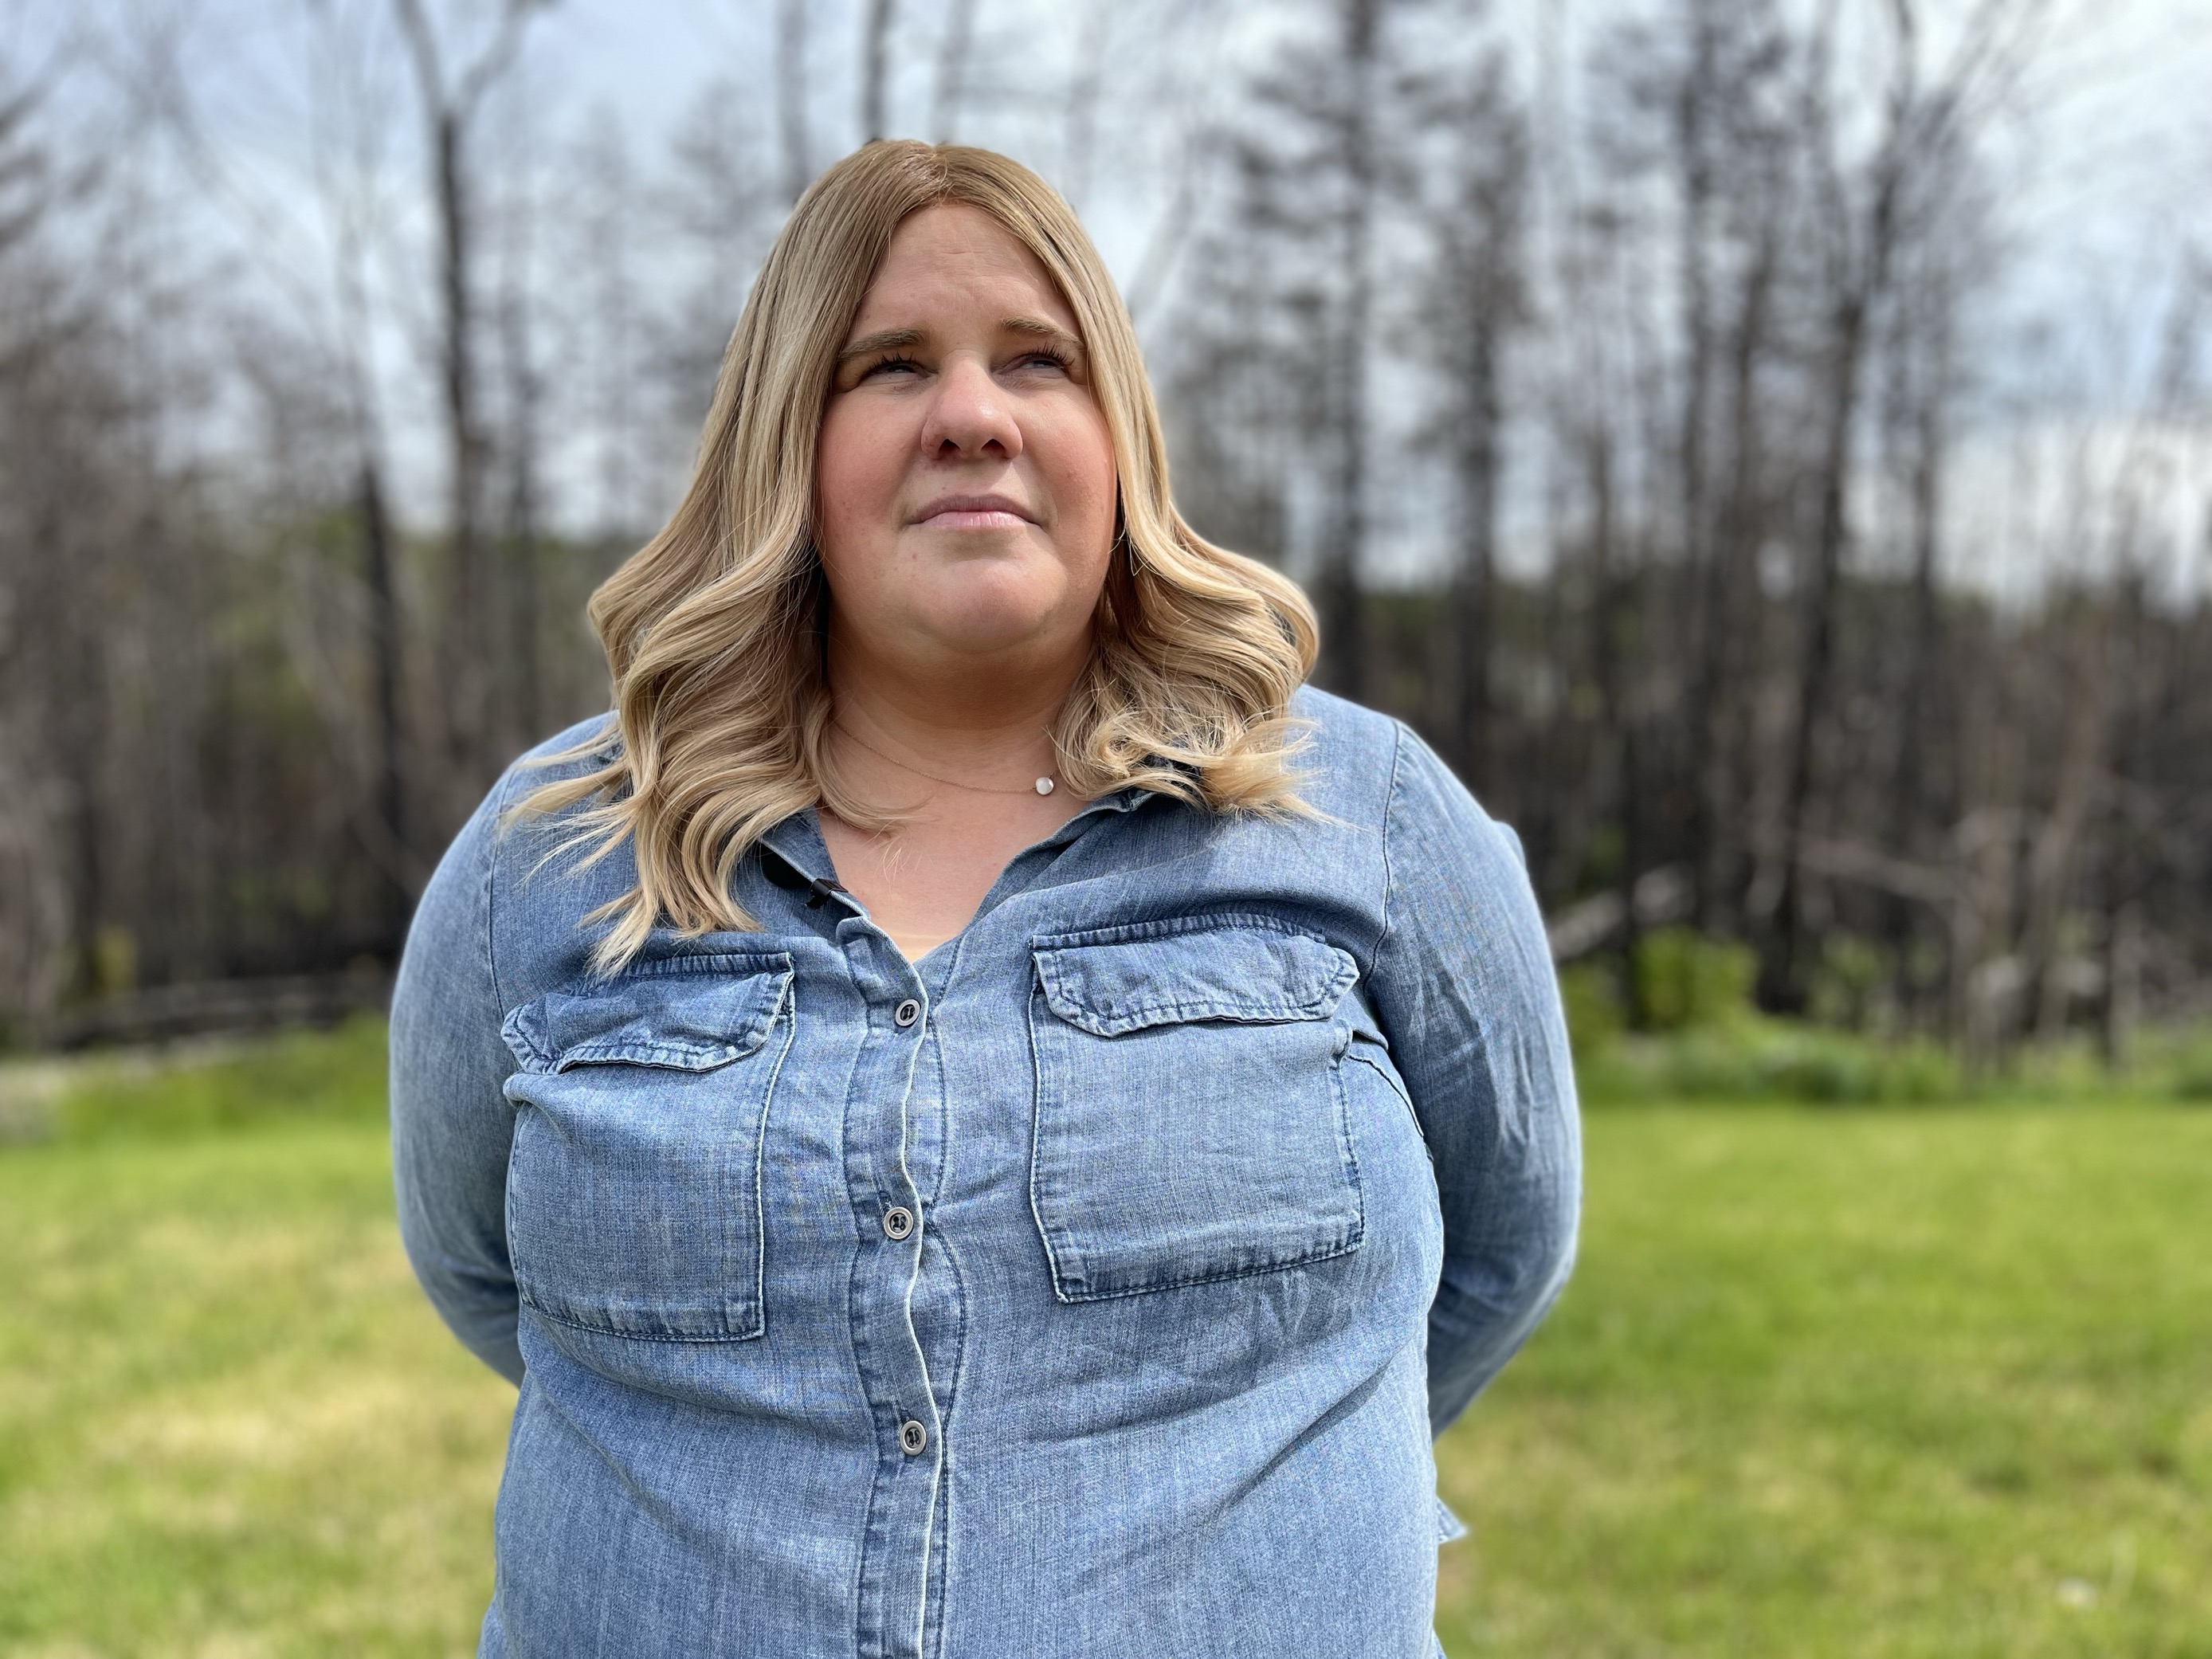 She outran a raging wildfire. Now, this N.S. woman demands faster alerts